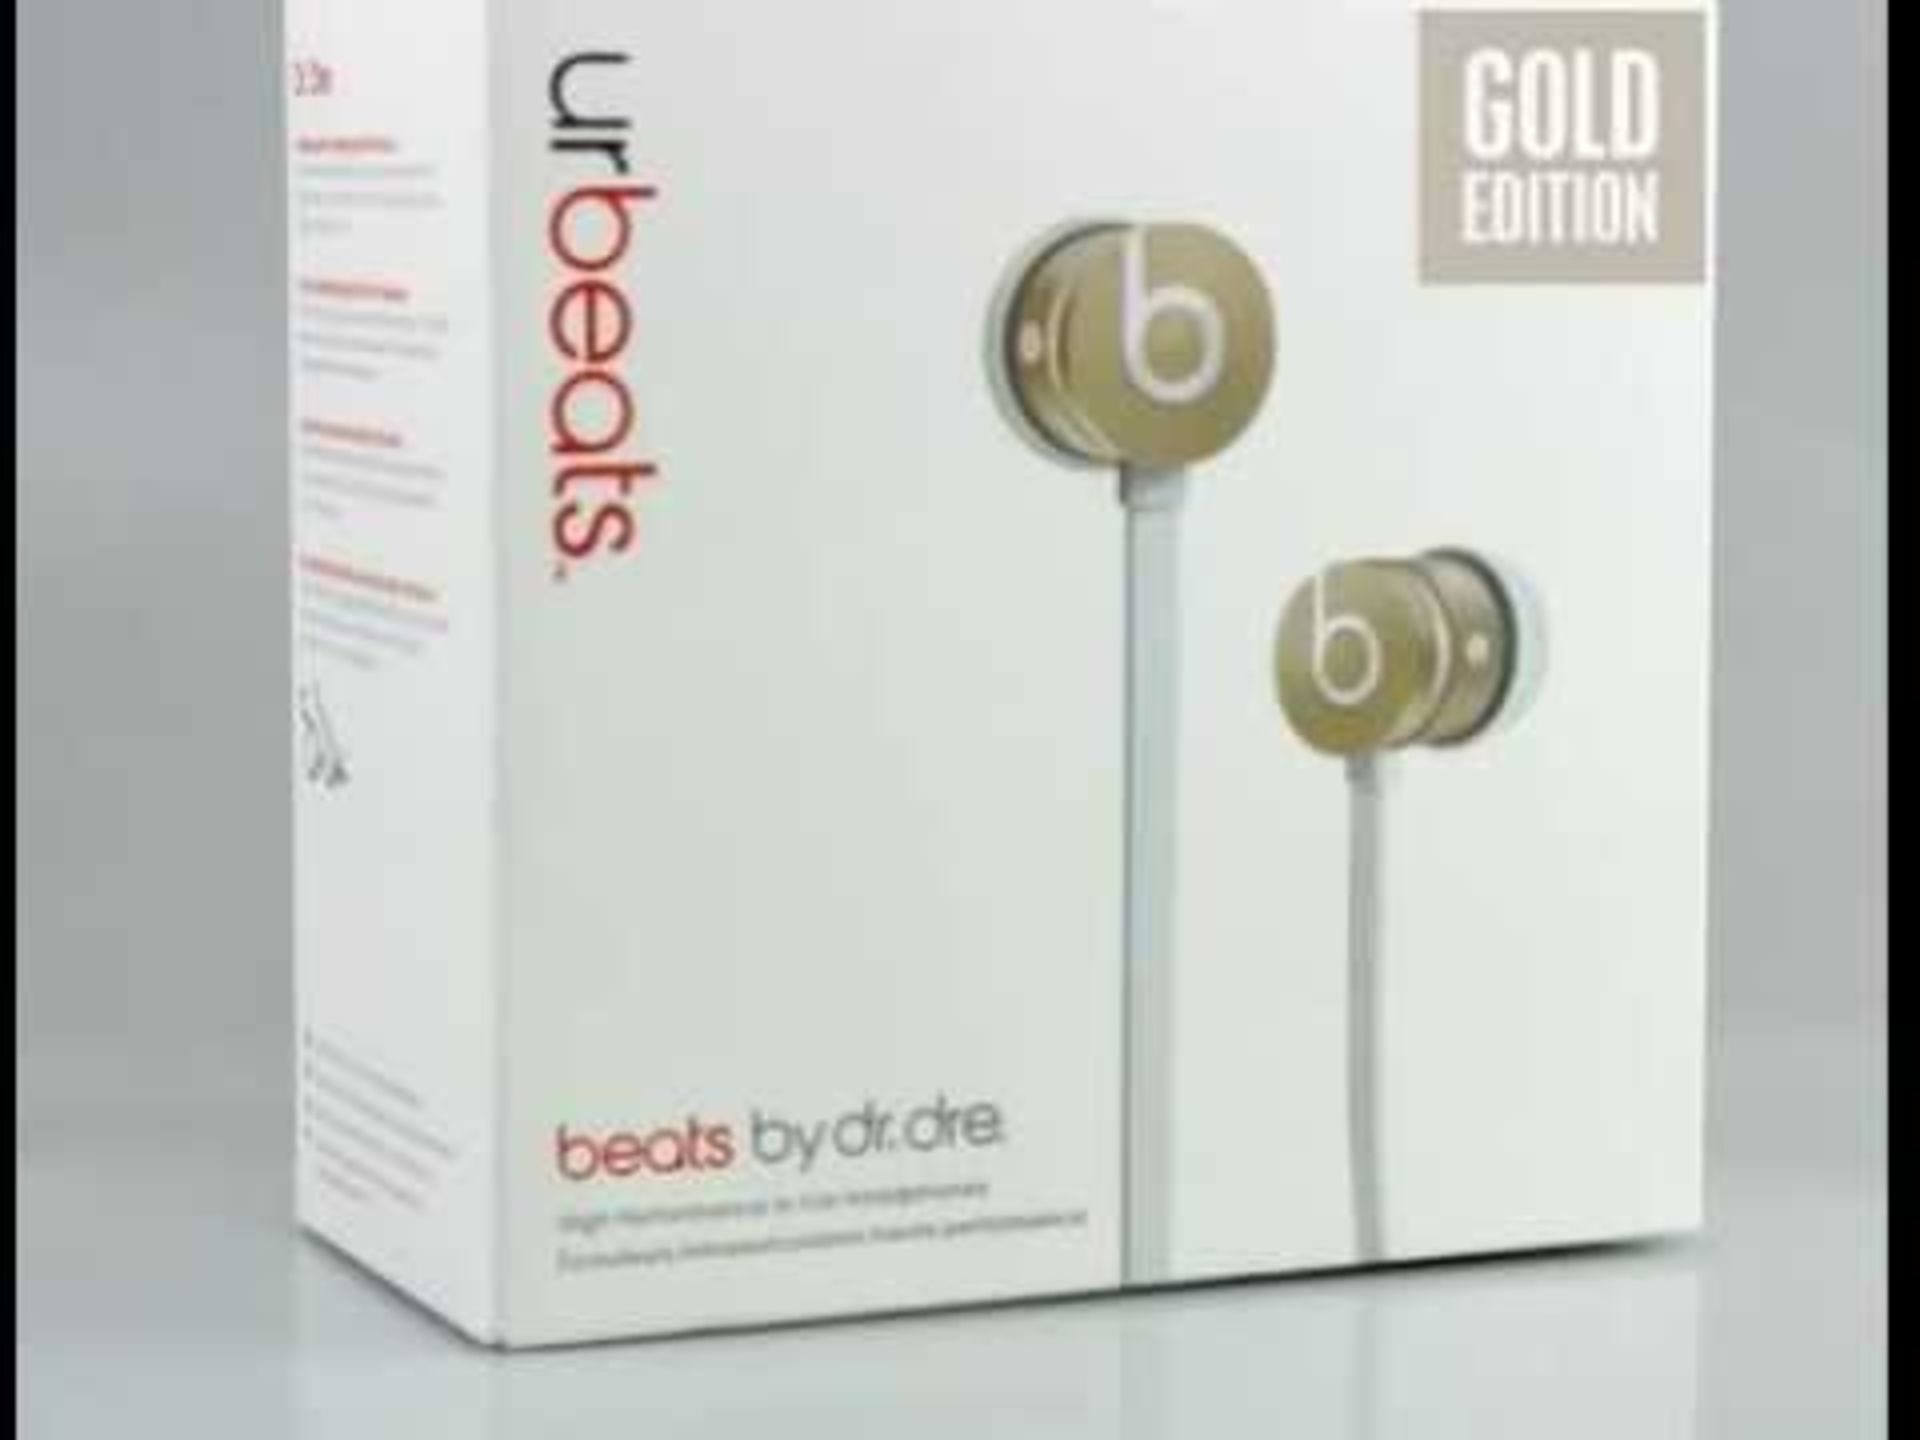 V Brand New Beats By Dr Dre urBeats Earphones - Gold- These are boxed and sealed - With Apple